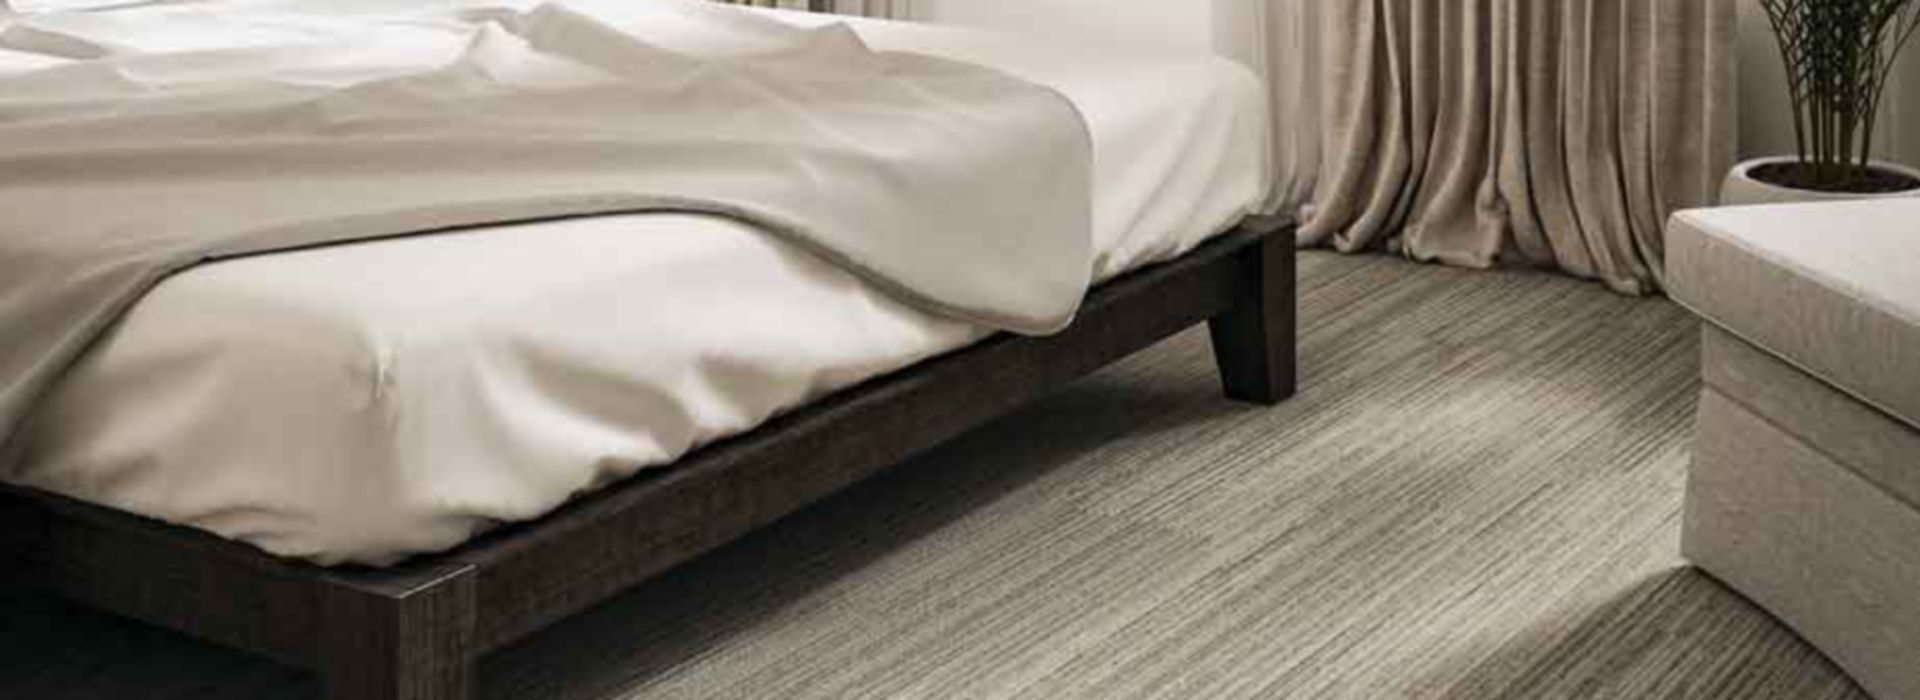 Interface SWTS 110 plank carpet tile in hotel guest room